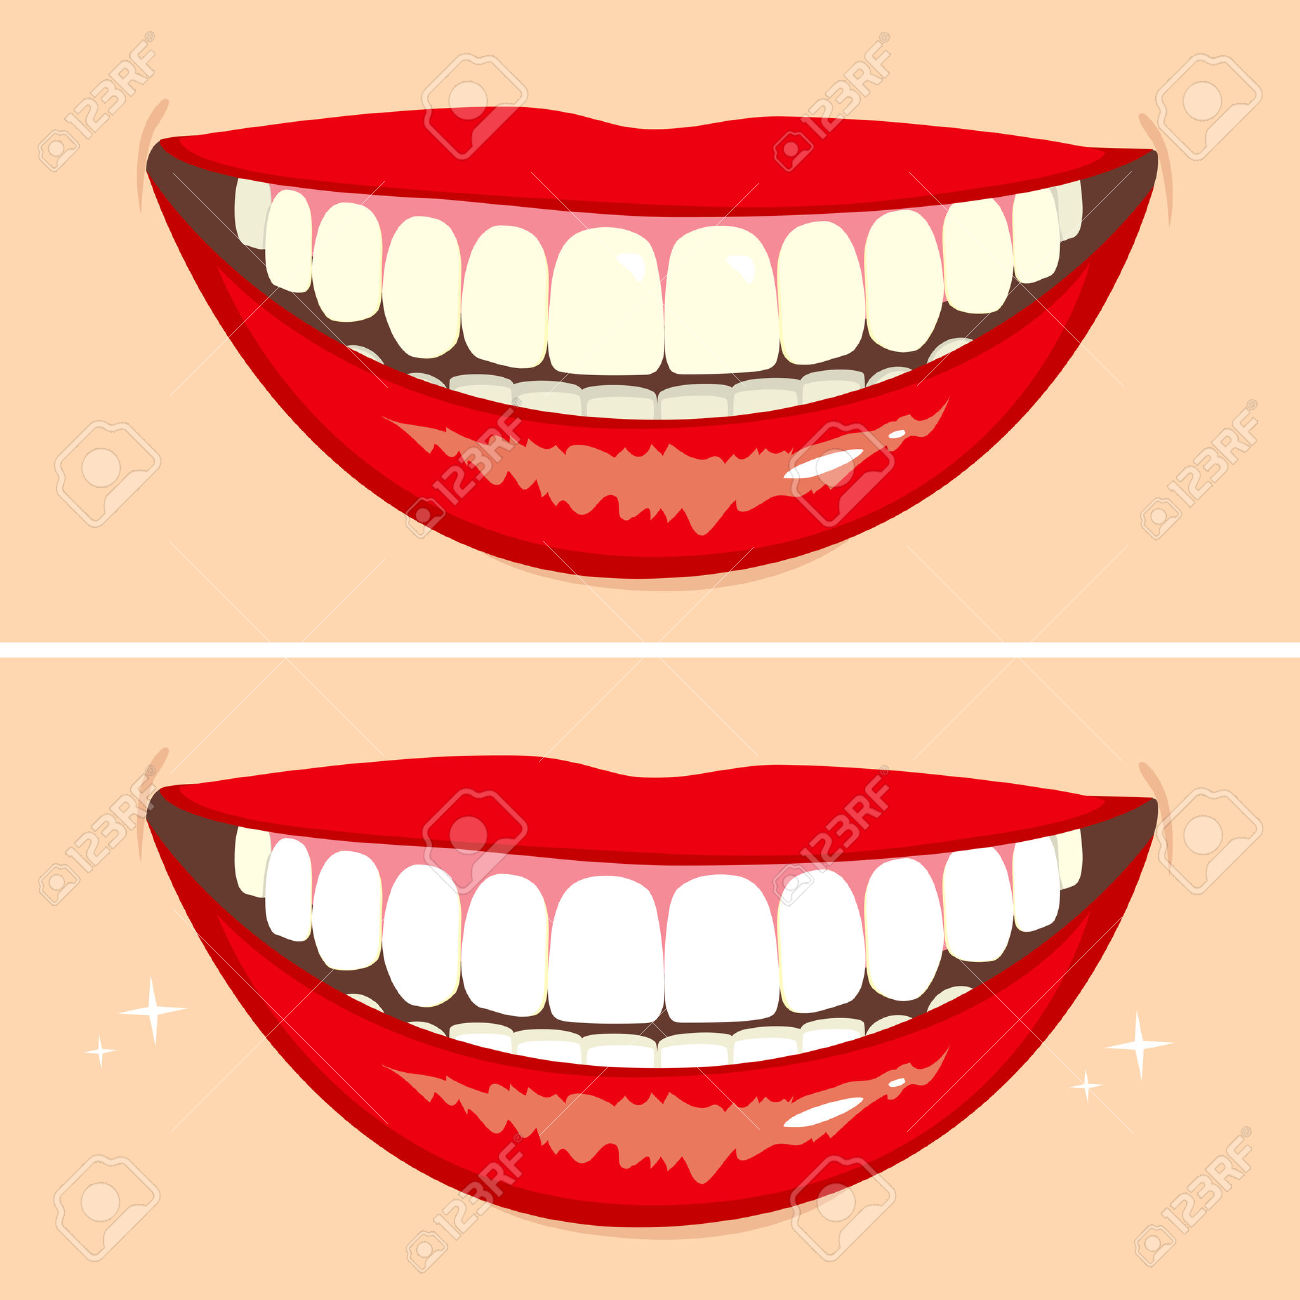 clipart smile with teeth - photo #35